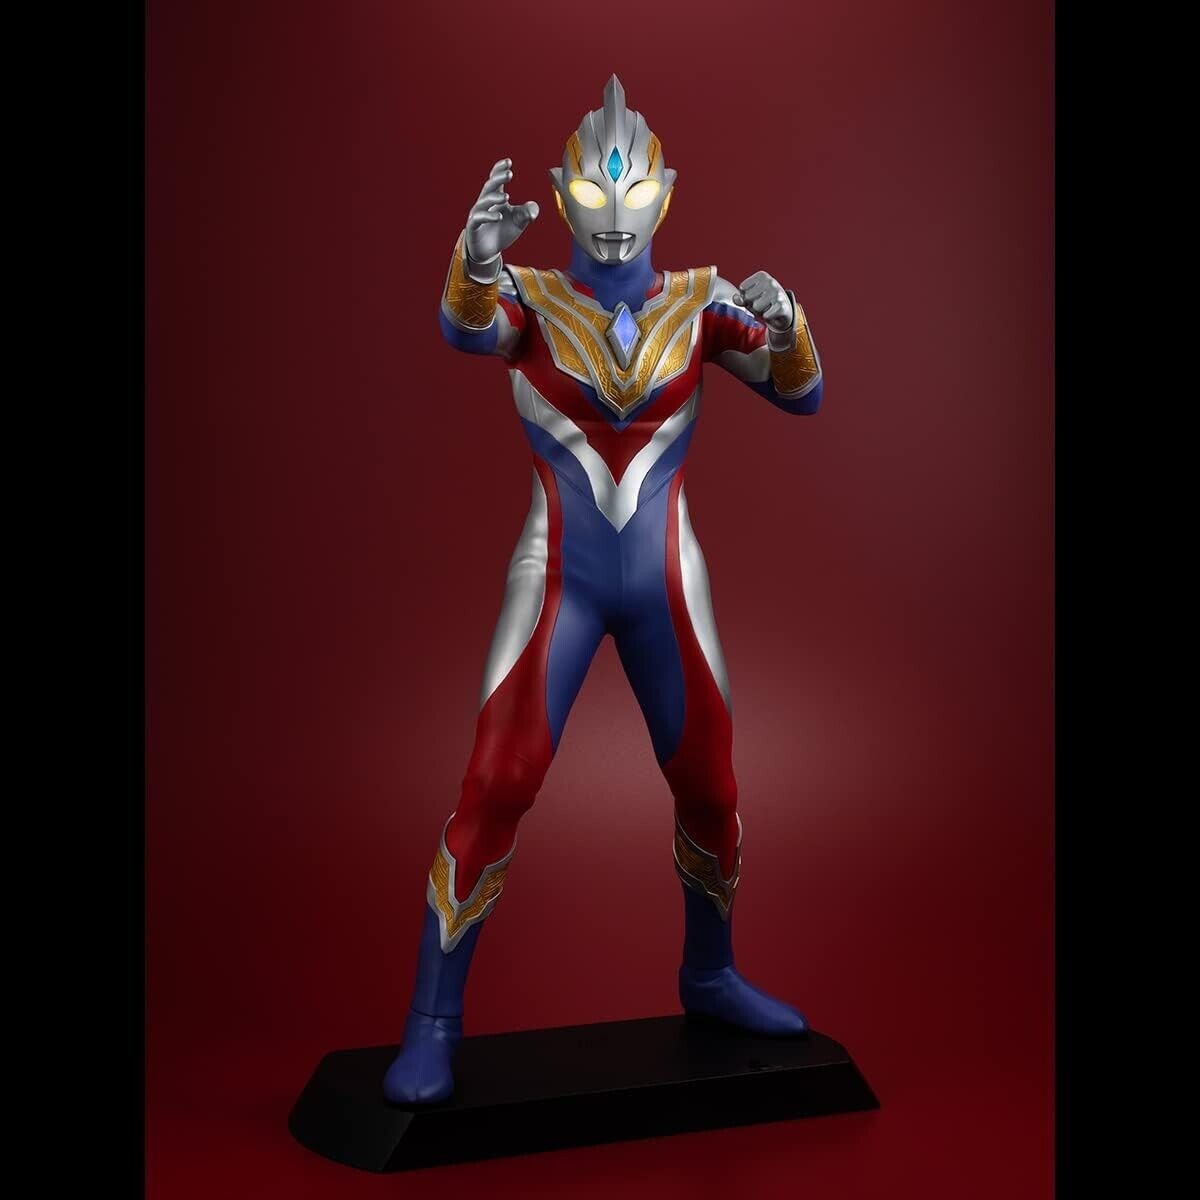 BRAND NEW Megahouse Ultraman Action Figure Trigger Ultimate Article # MGH83221